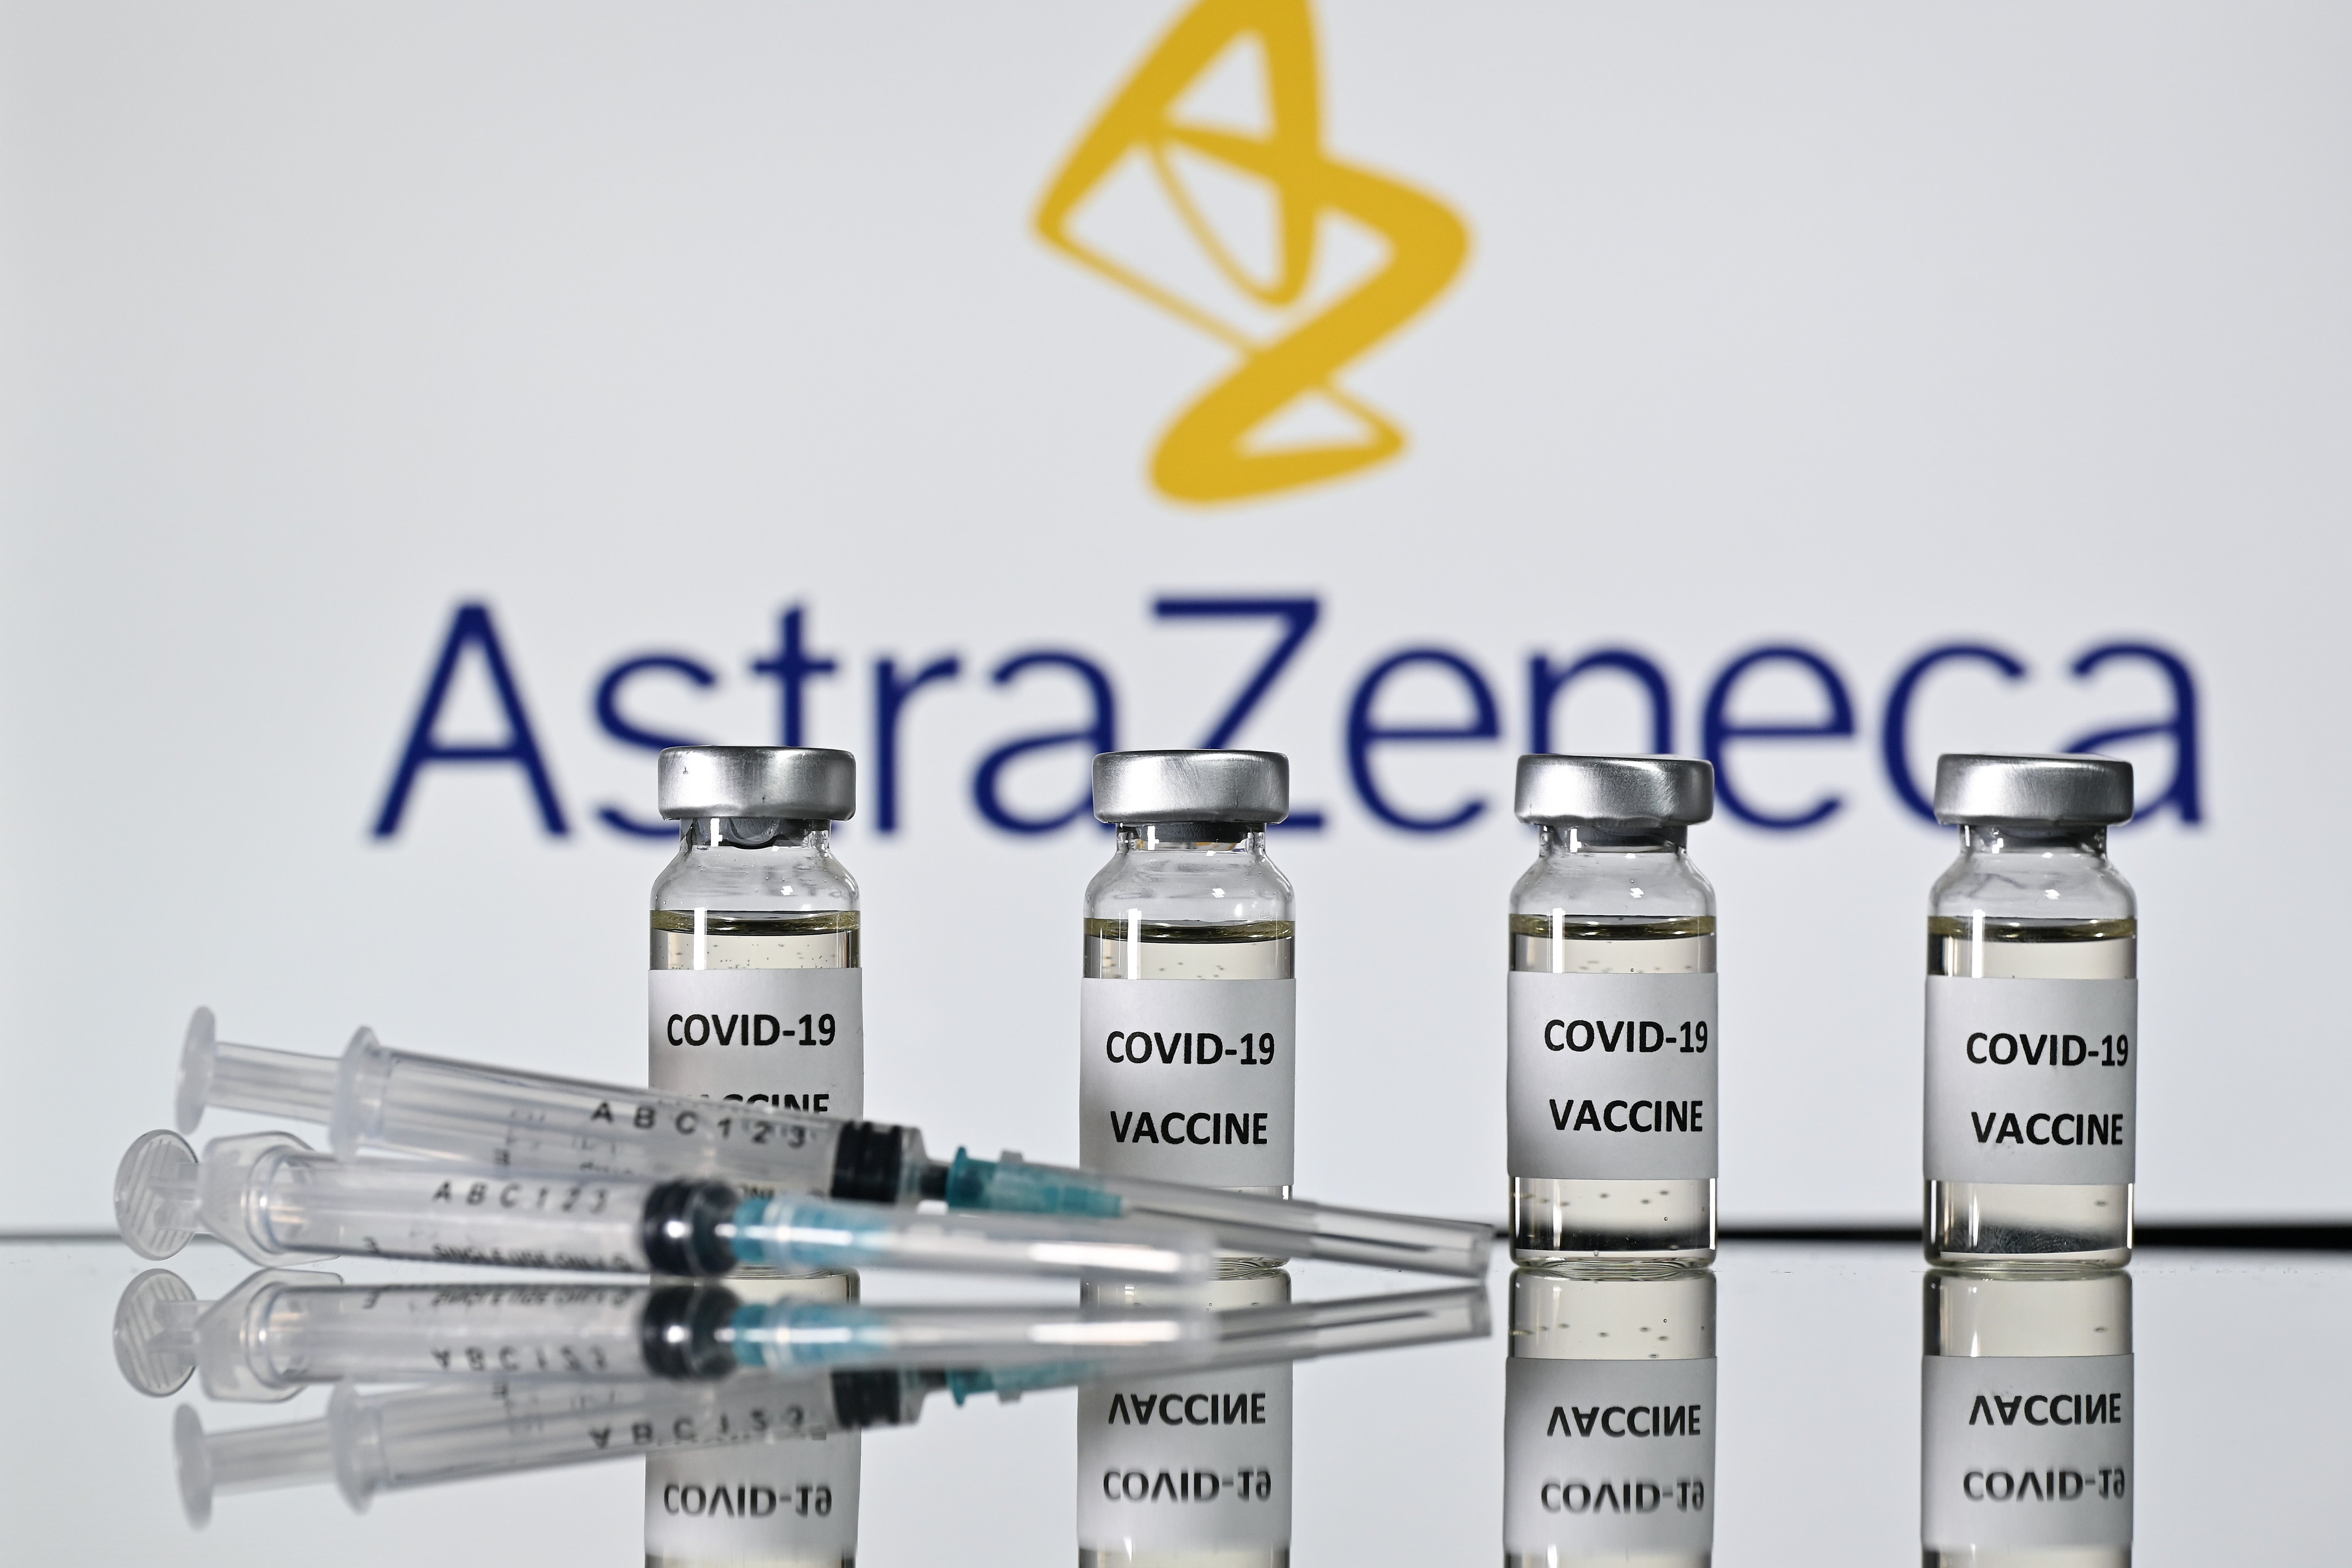 In India an alleged adverse event was reported during the trial of AstraZeneca’s Covid-19 vaccine&nbsp;